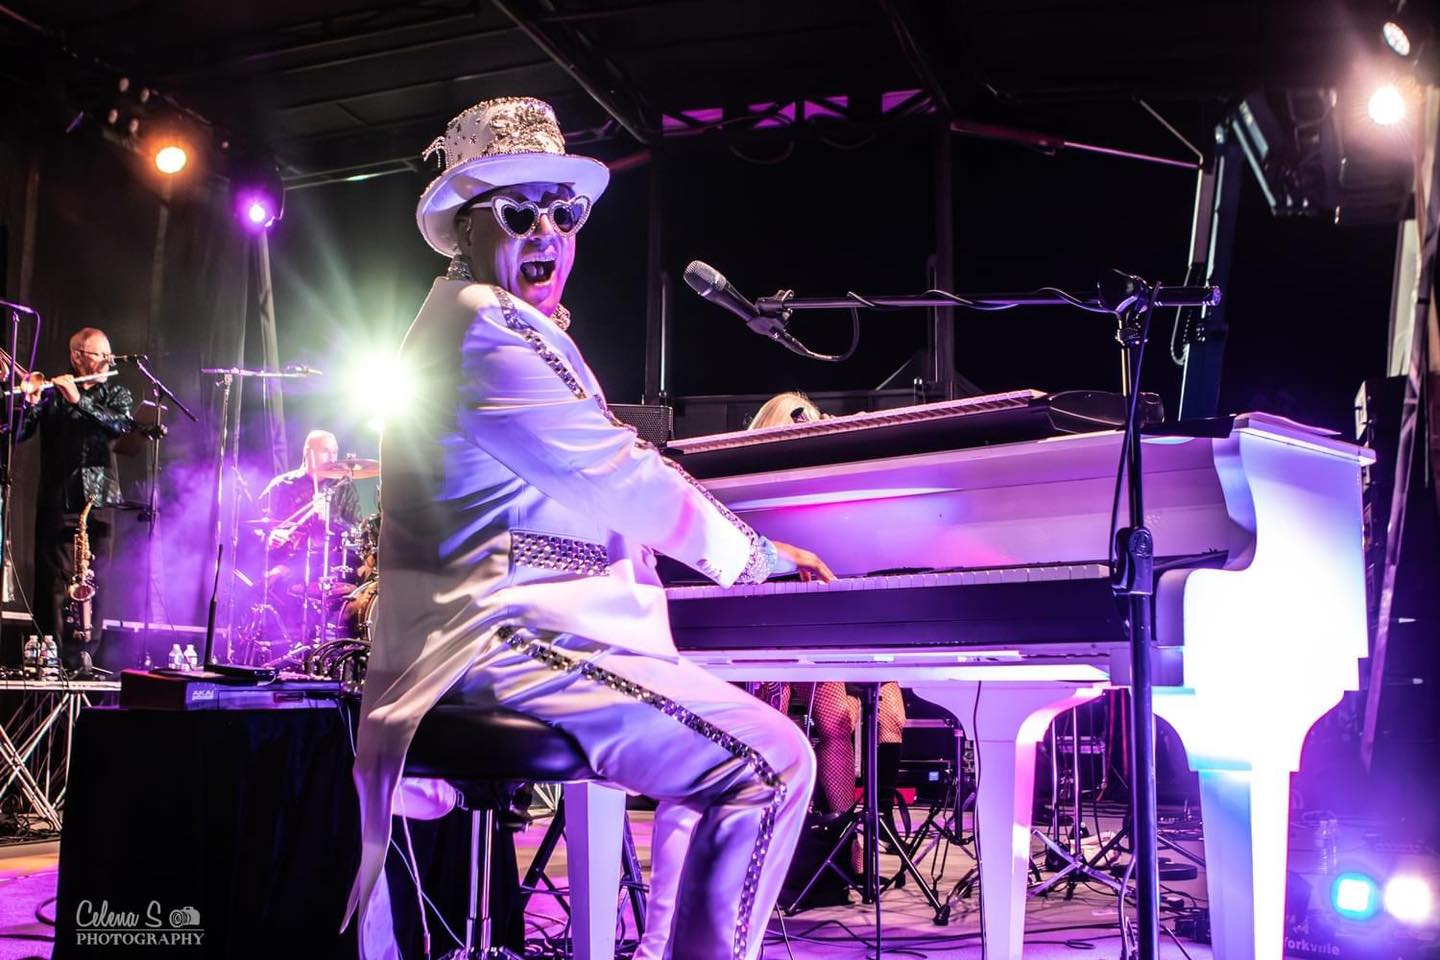 Andrew Johns, Elton John Tribute artist, sitting at a piano. He will be performing at the RE/MAX Tribute Night.